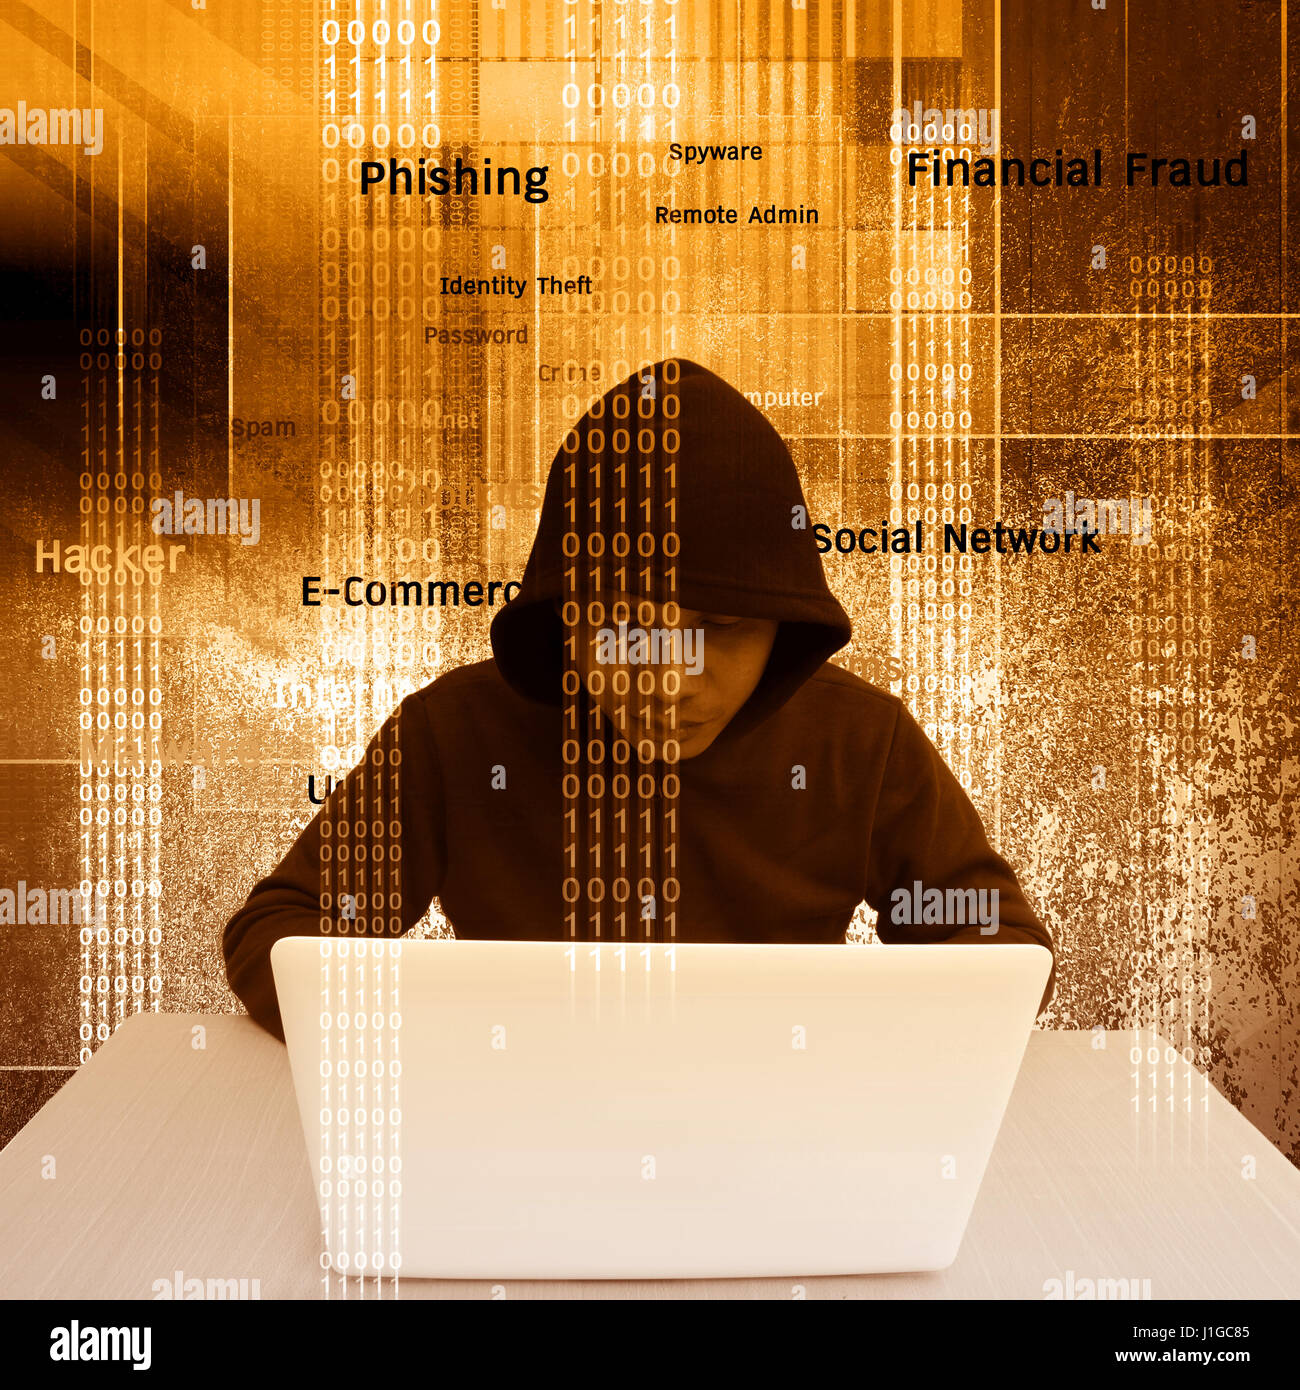 Computer hacker or Cyber attack concept background Stock Photo